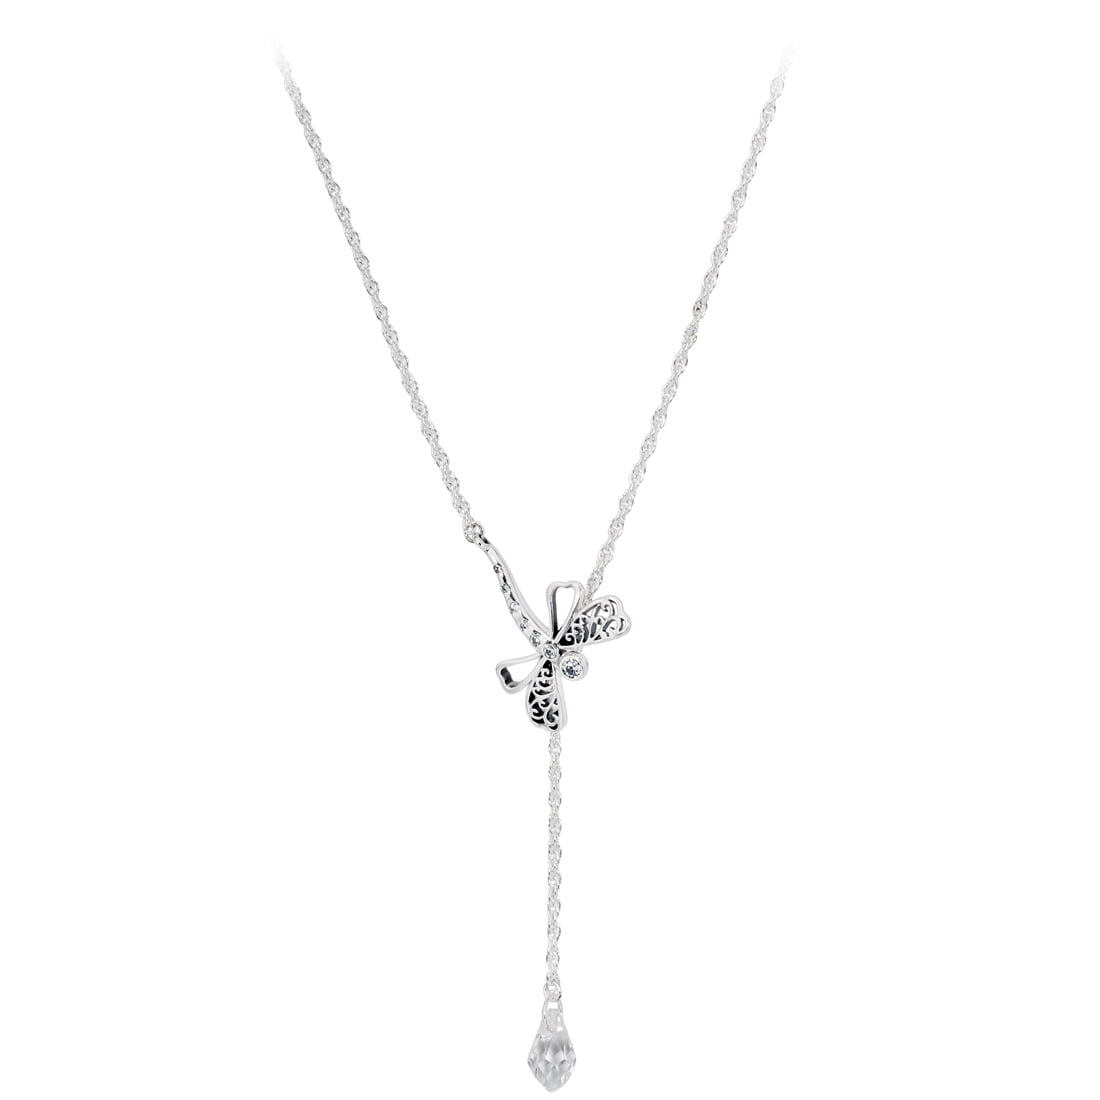 PANDORA - Dragonfly Y-chain necklace in sterling silver w/1 bezel-set